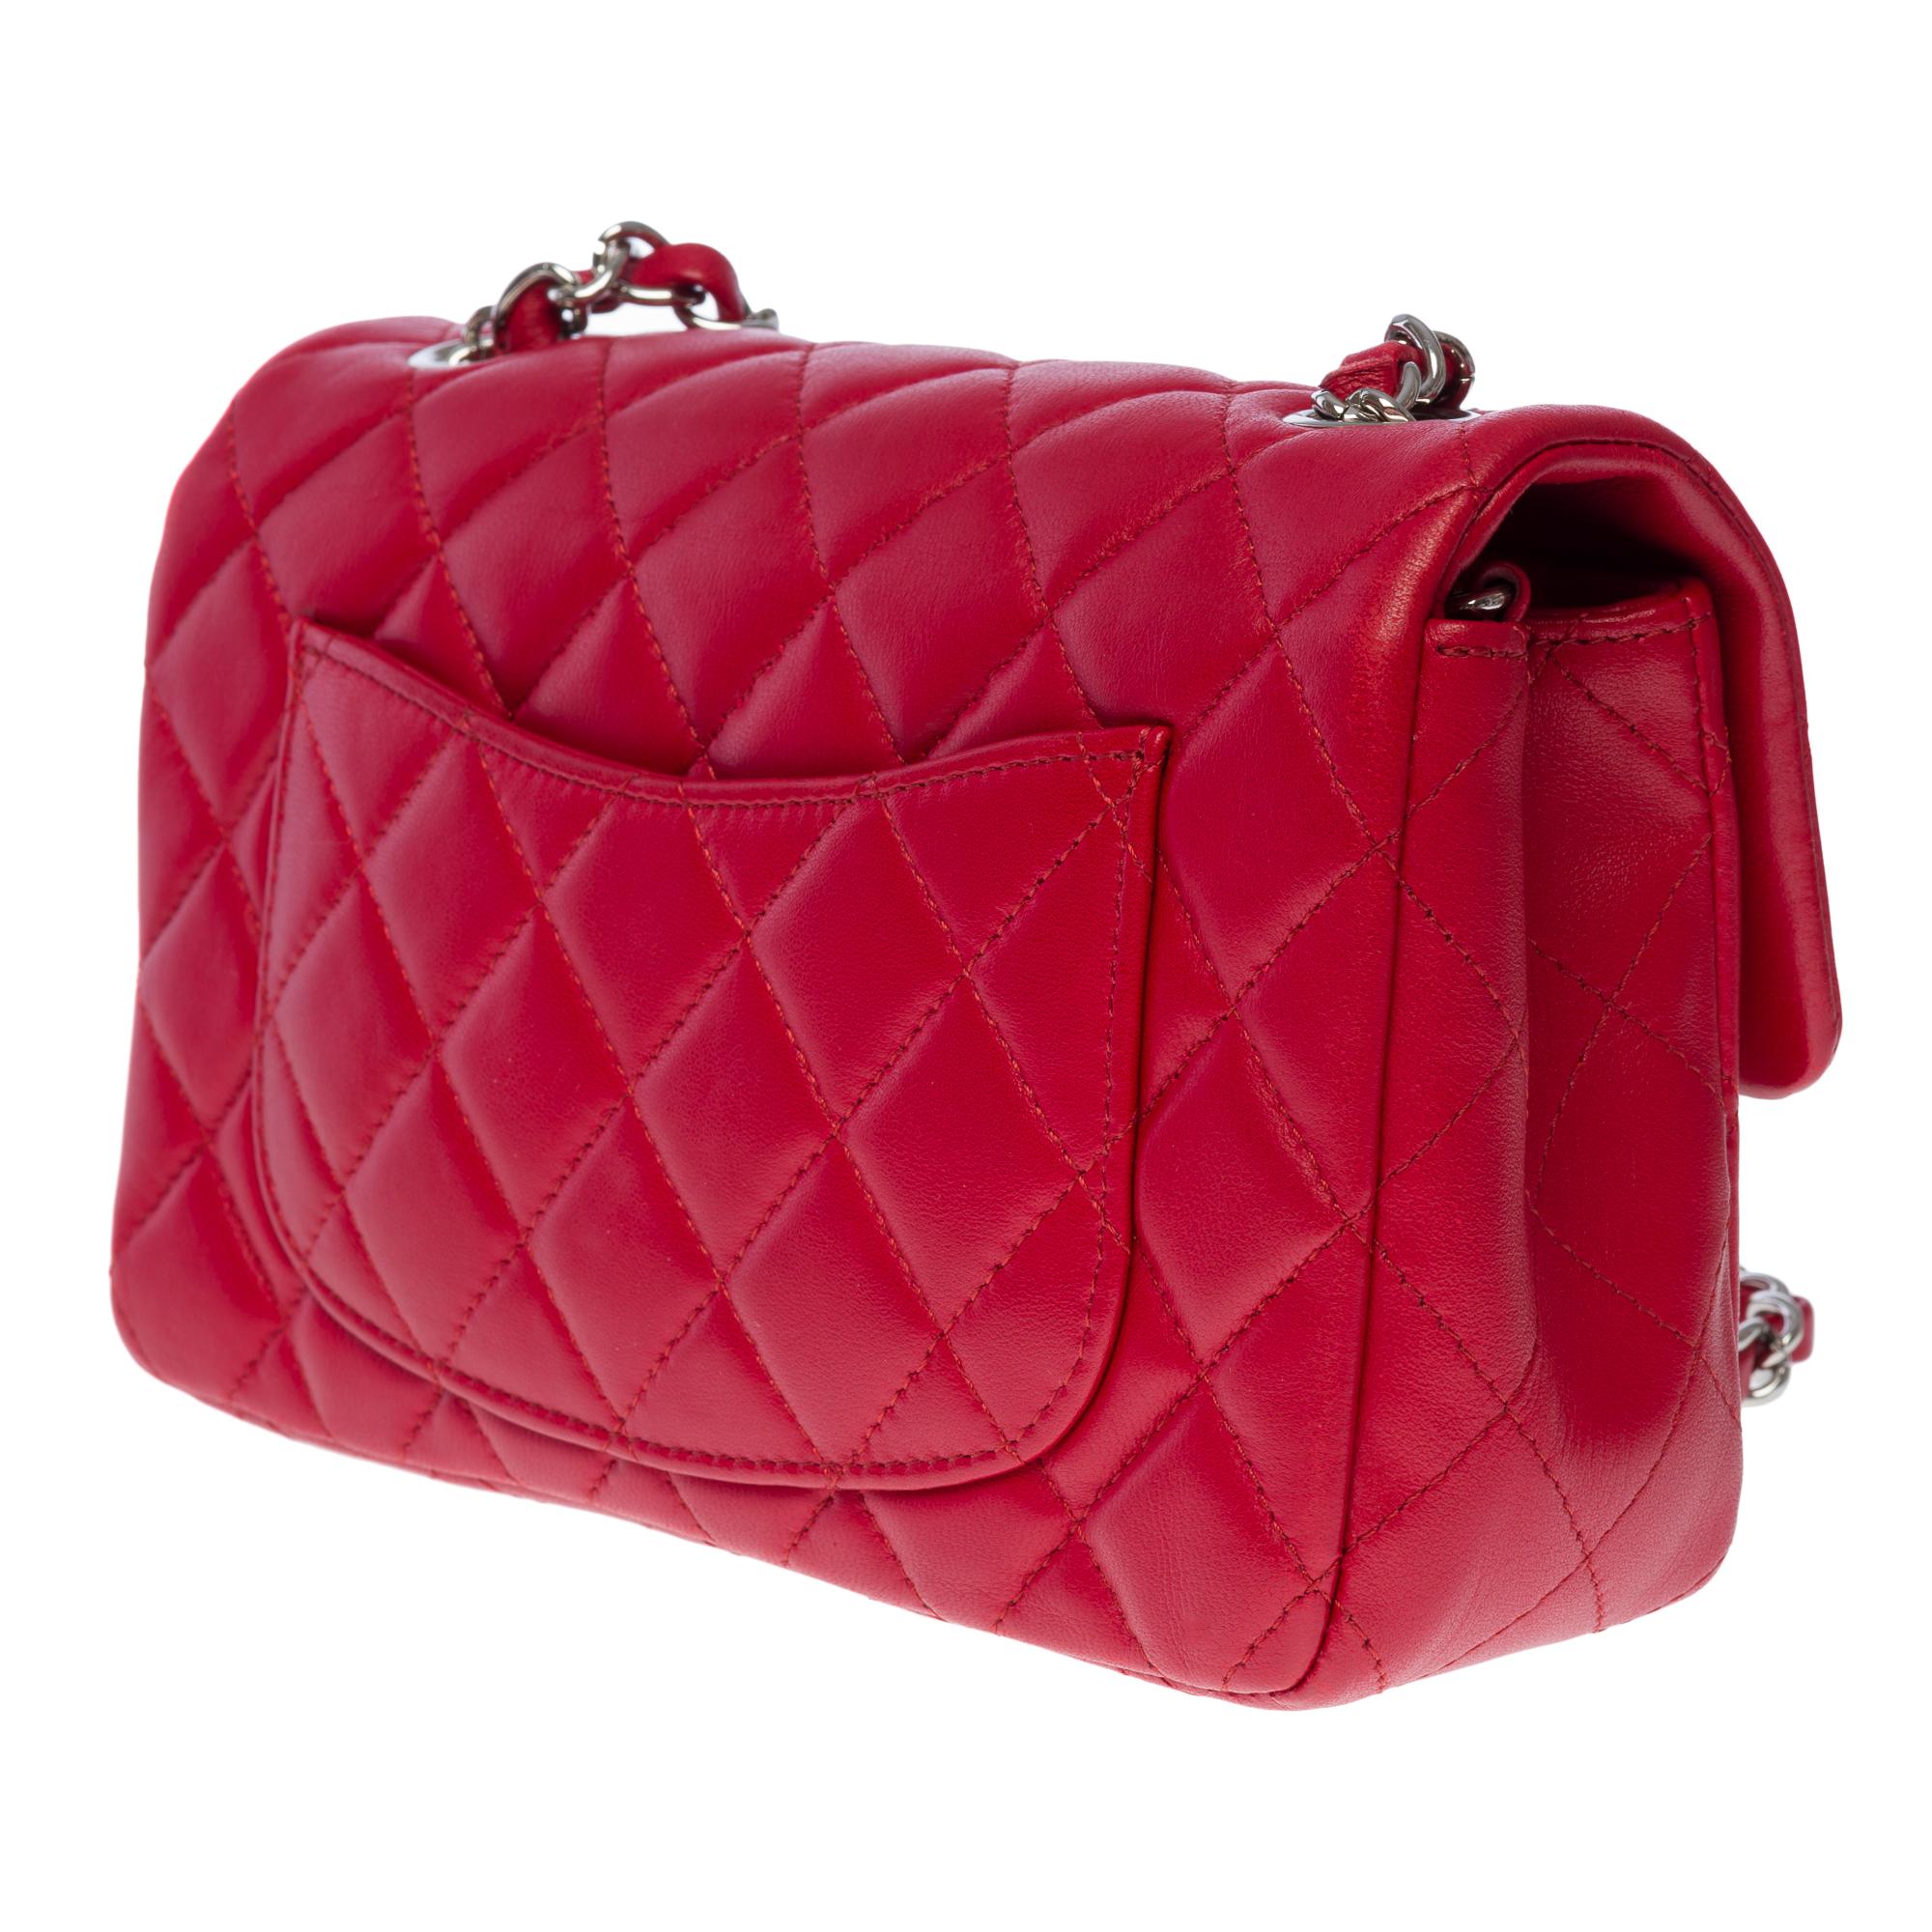 Women's Stunning Chanel Timeless Mini Flap shoulder bag in Red quilted lamb leather, SHW